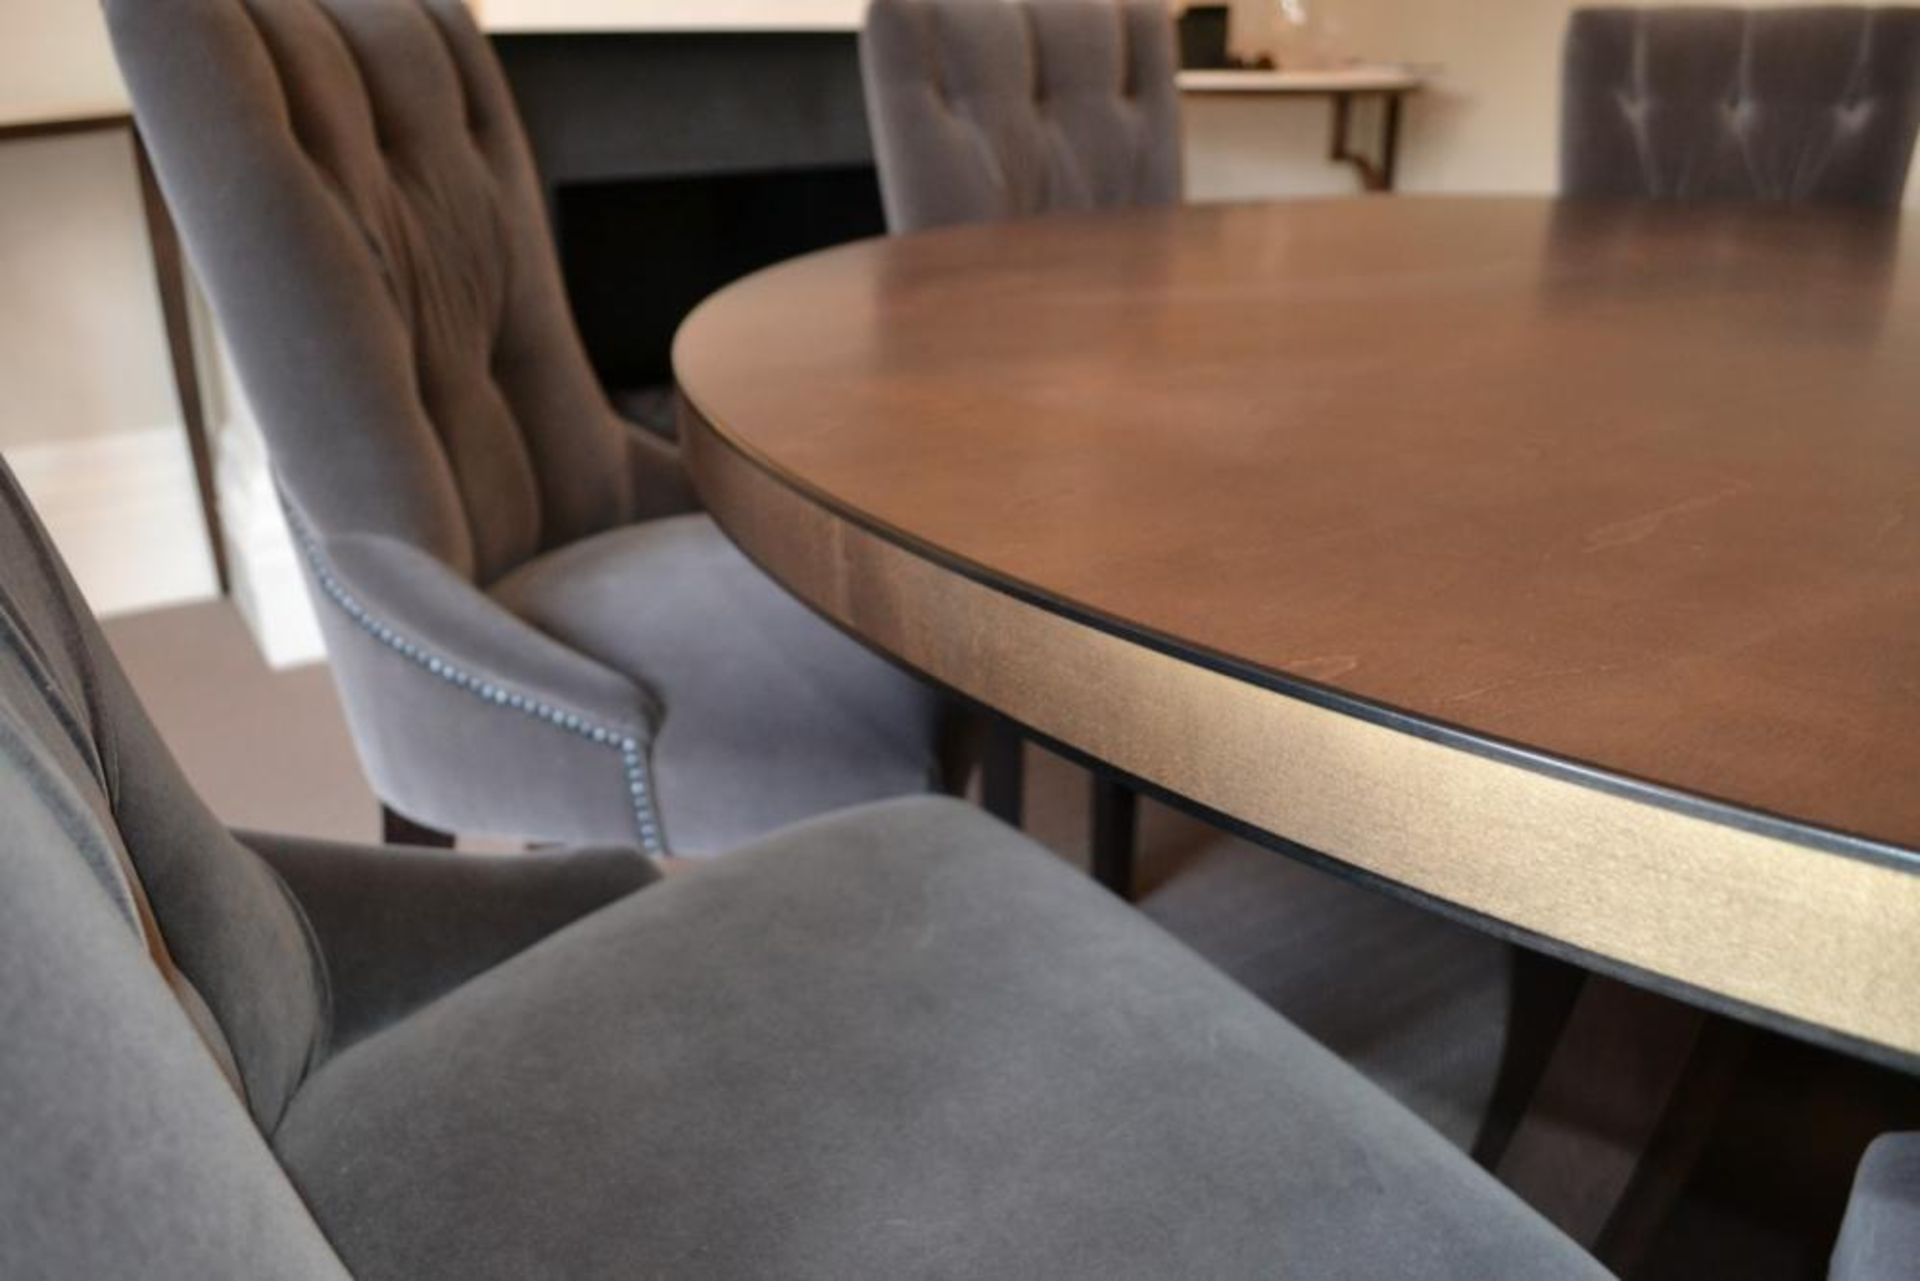 1 x Bespoke Round Dining Table With Sycamore Wood Finish - 1800mm Diameter - Ideal For Family Gather - Image 3 of 14